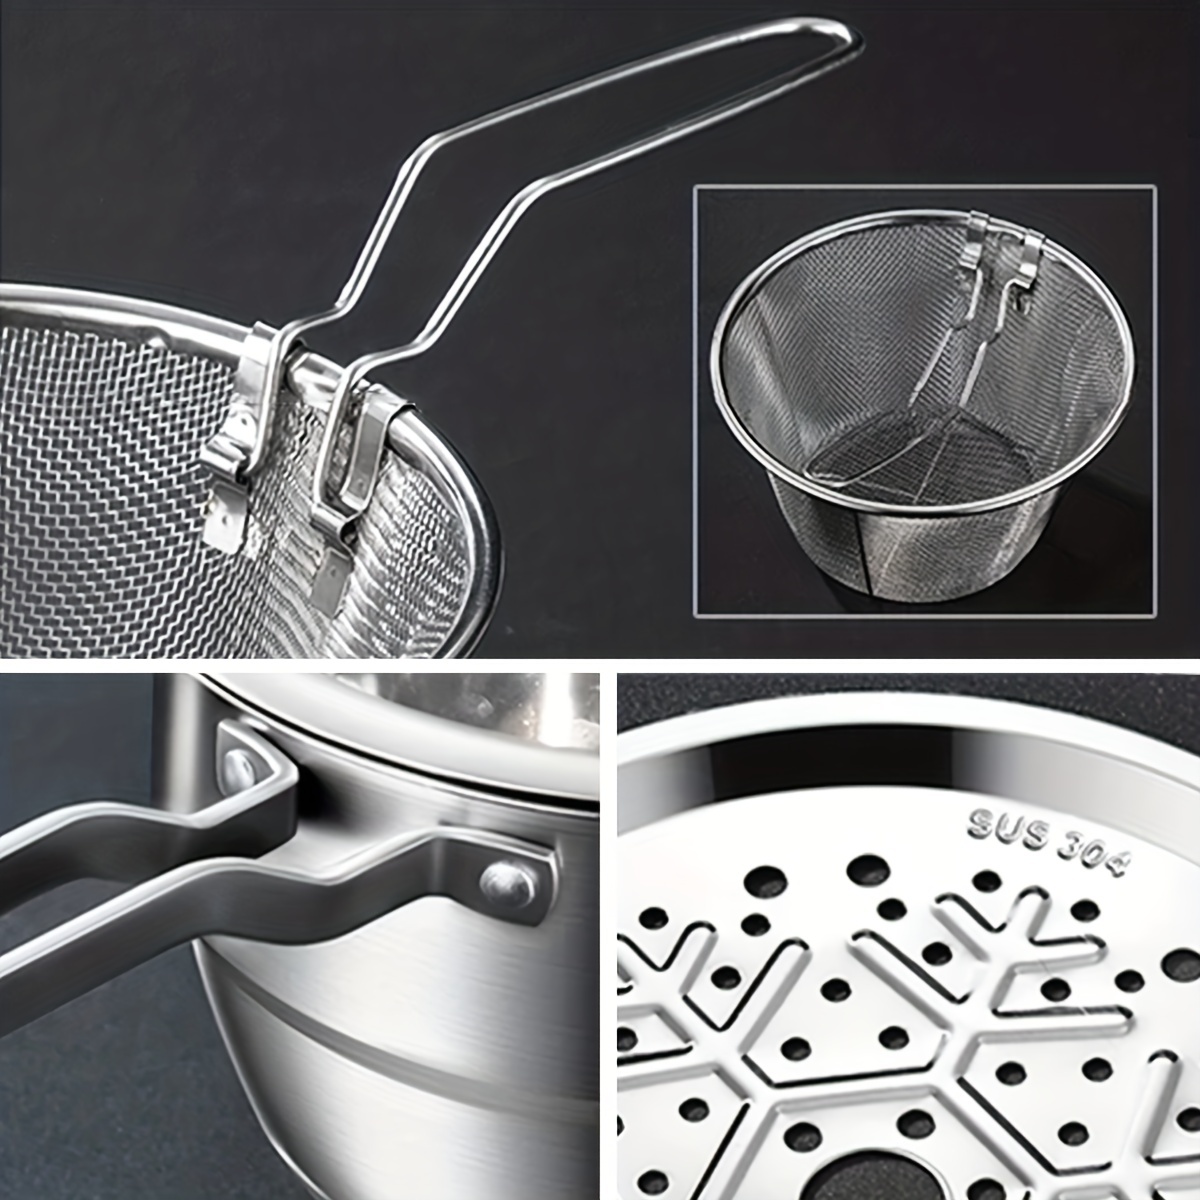 Stainless Steel Stockpot with Strainer Deep Fryer Cookware